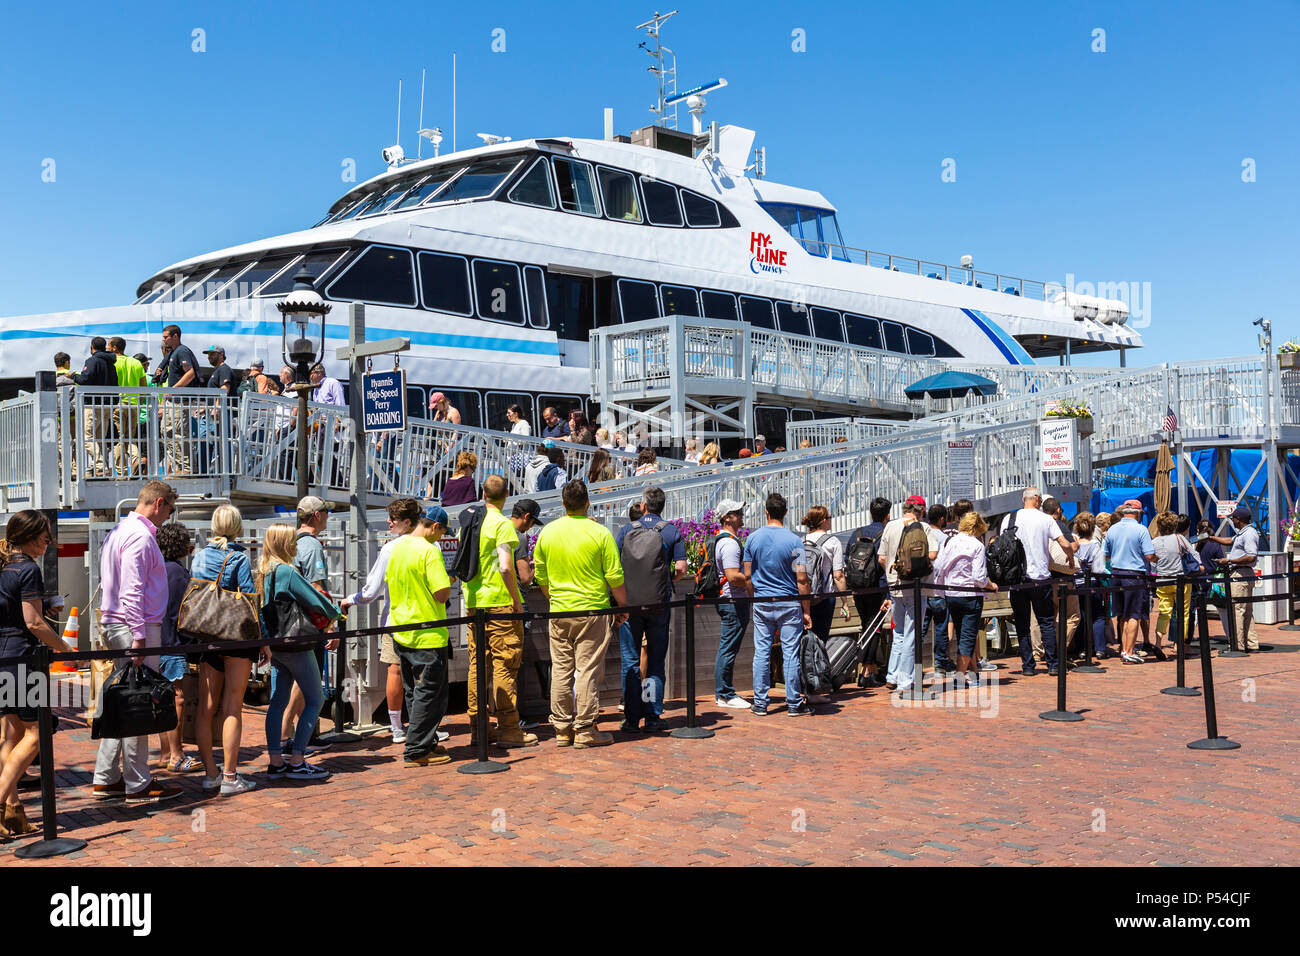 Passengers board a Hy-Line Cruises high-speed catamaran ferry, bound for Hyannis on the mainland, in Nantucket, Massachusetts. Stock Photo